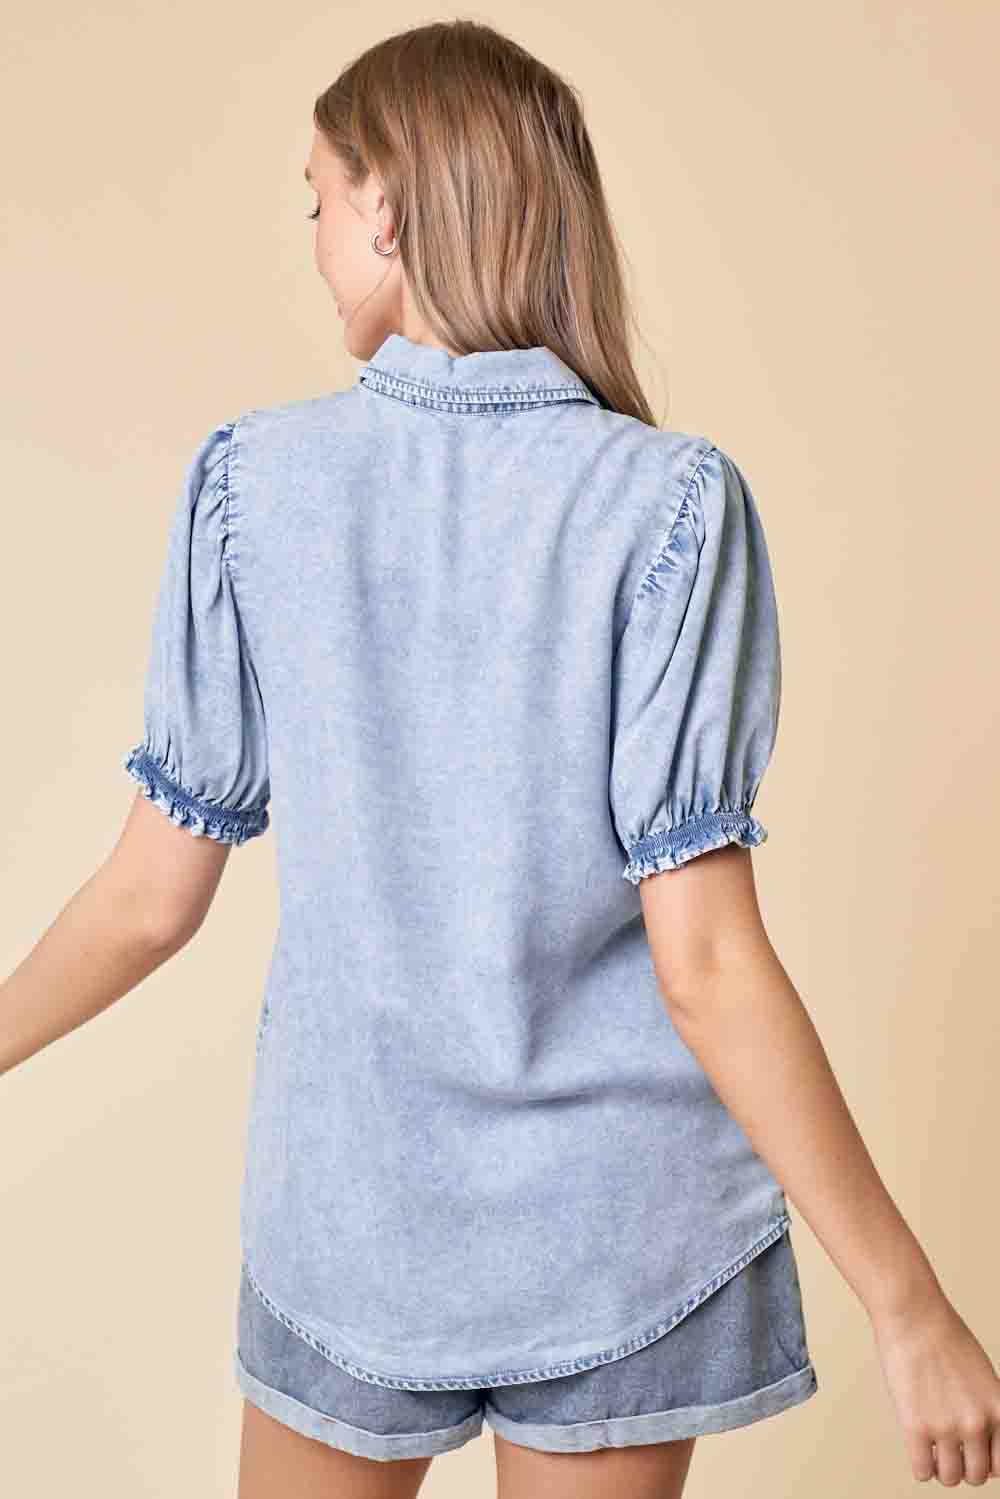 Puff Sleeve Button Down Shirt in Light Denim by Doe and Rae